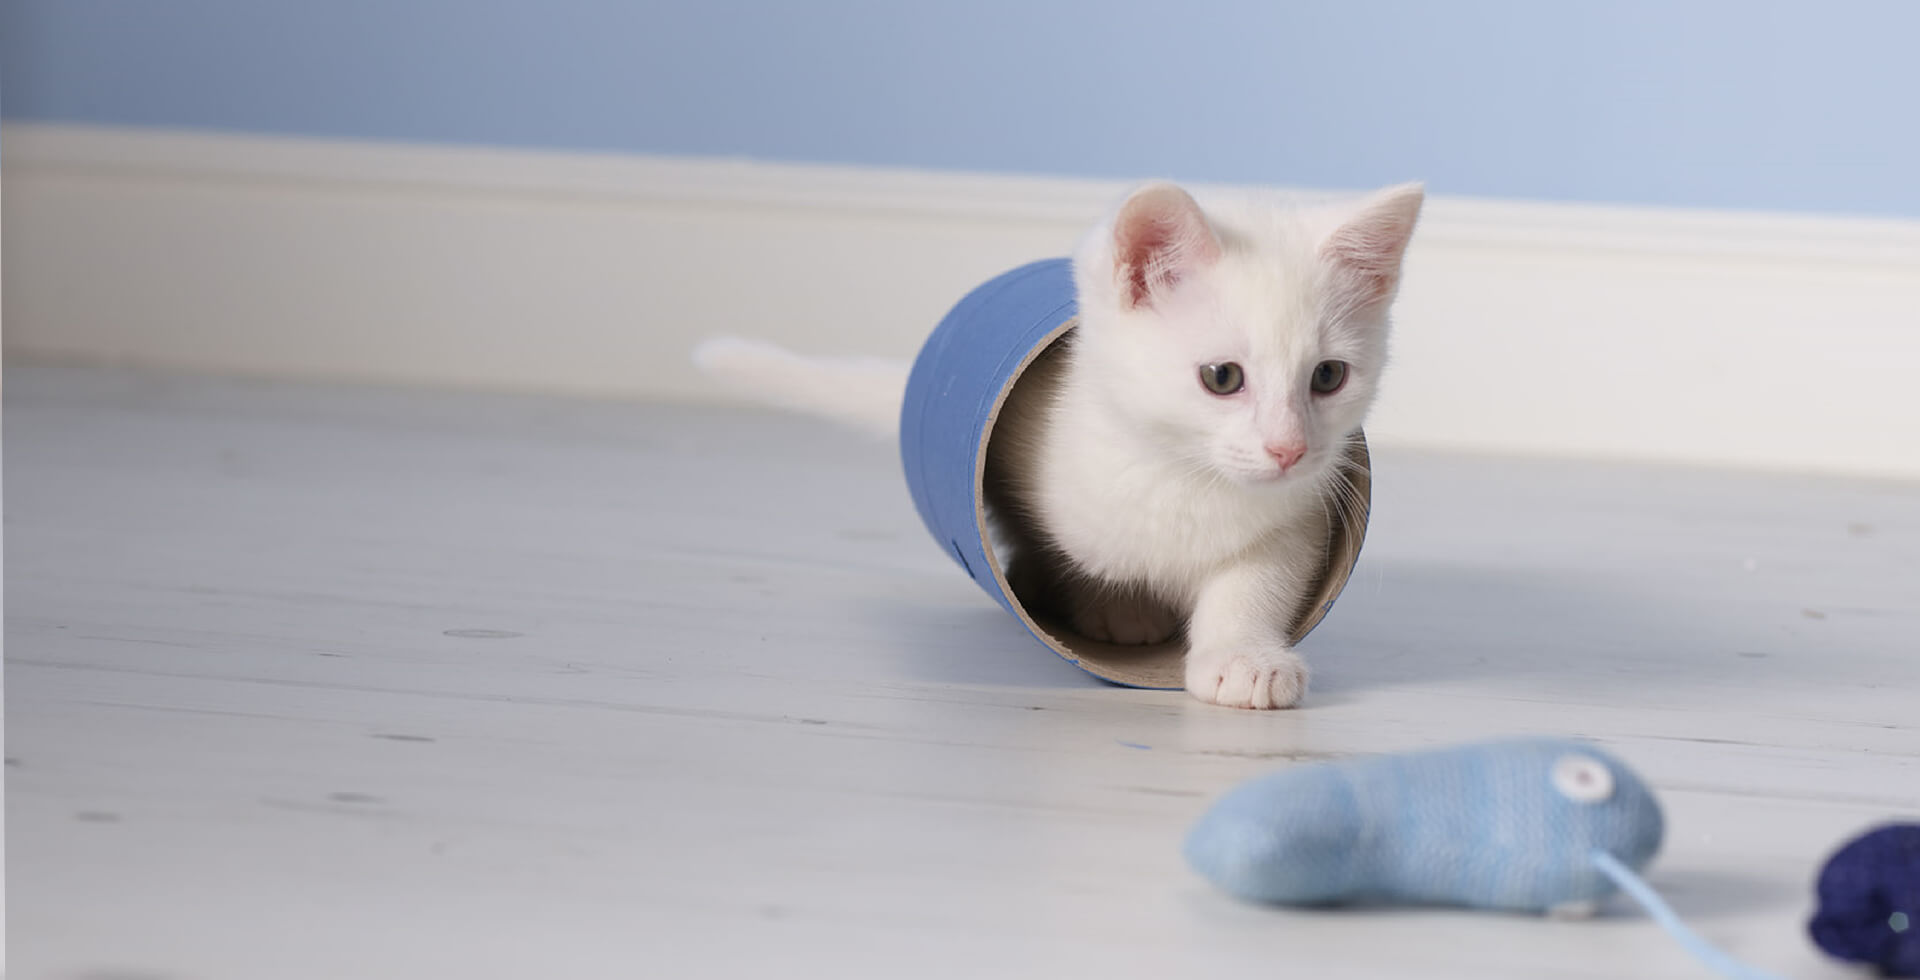 White kitten in cylindrical tunnel looking across at blue toy